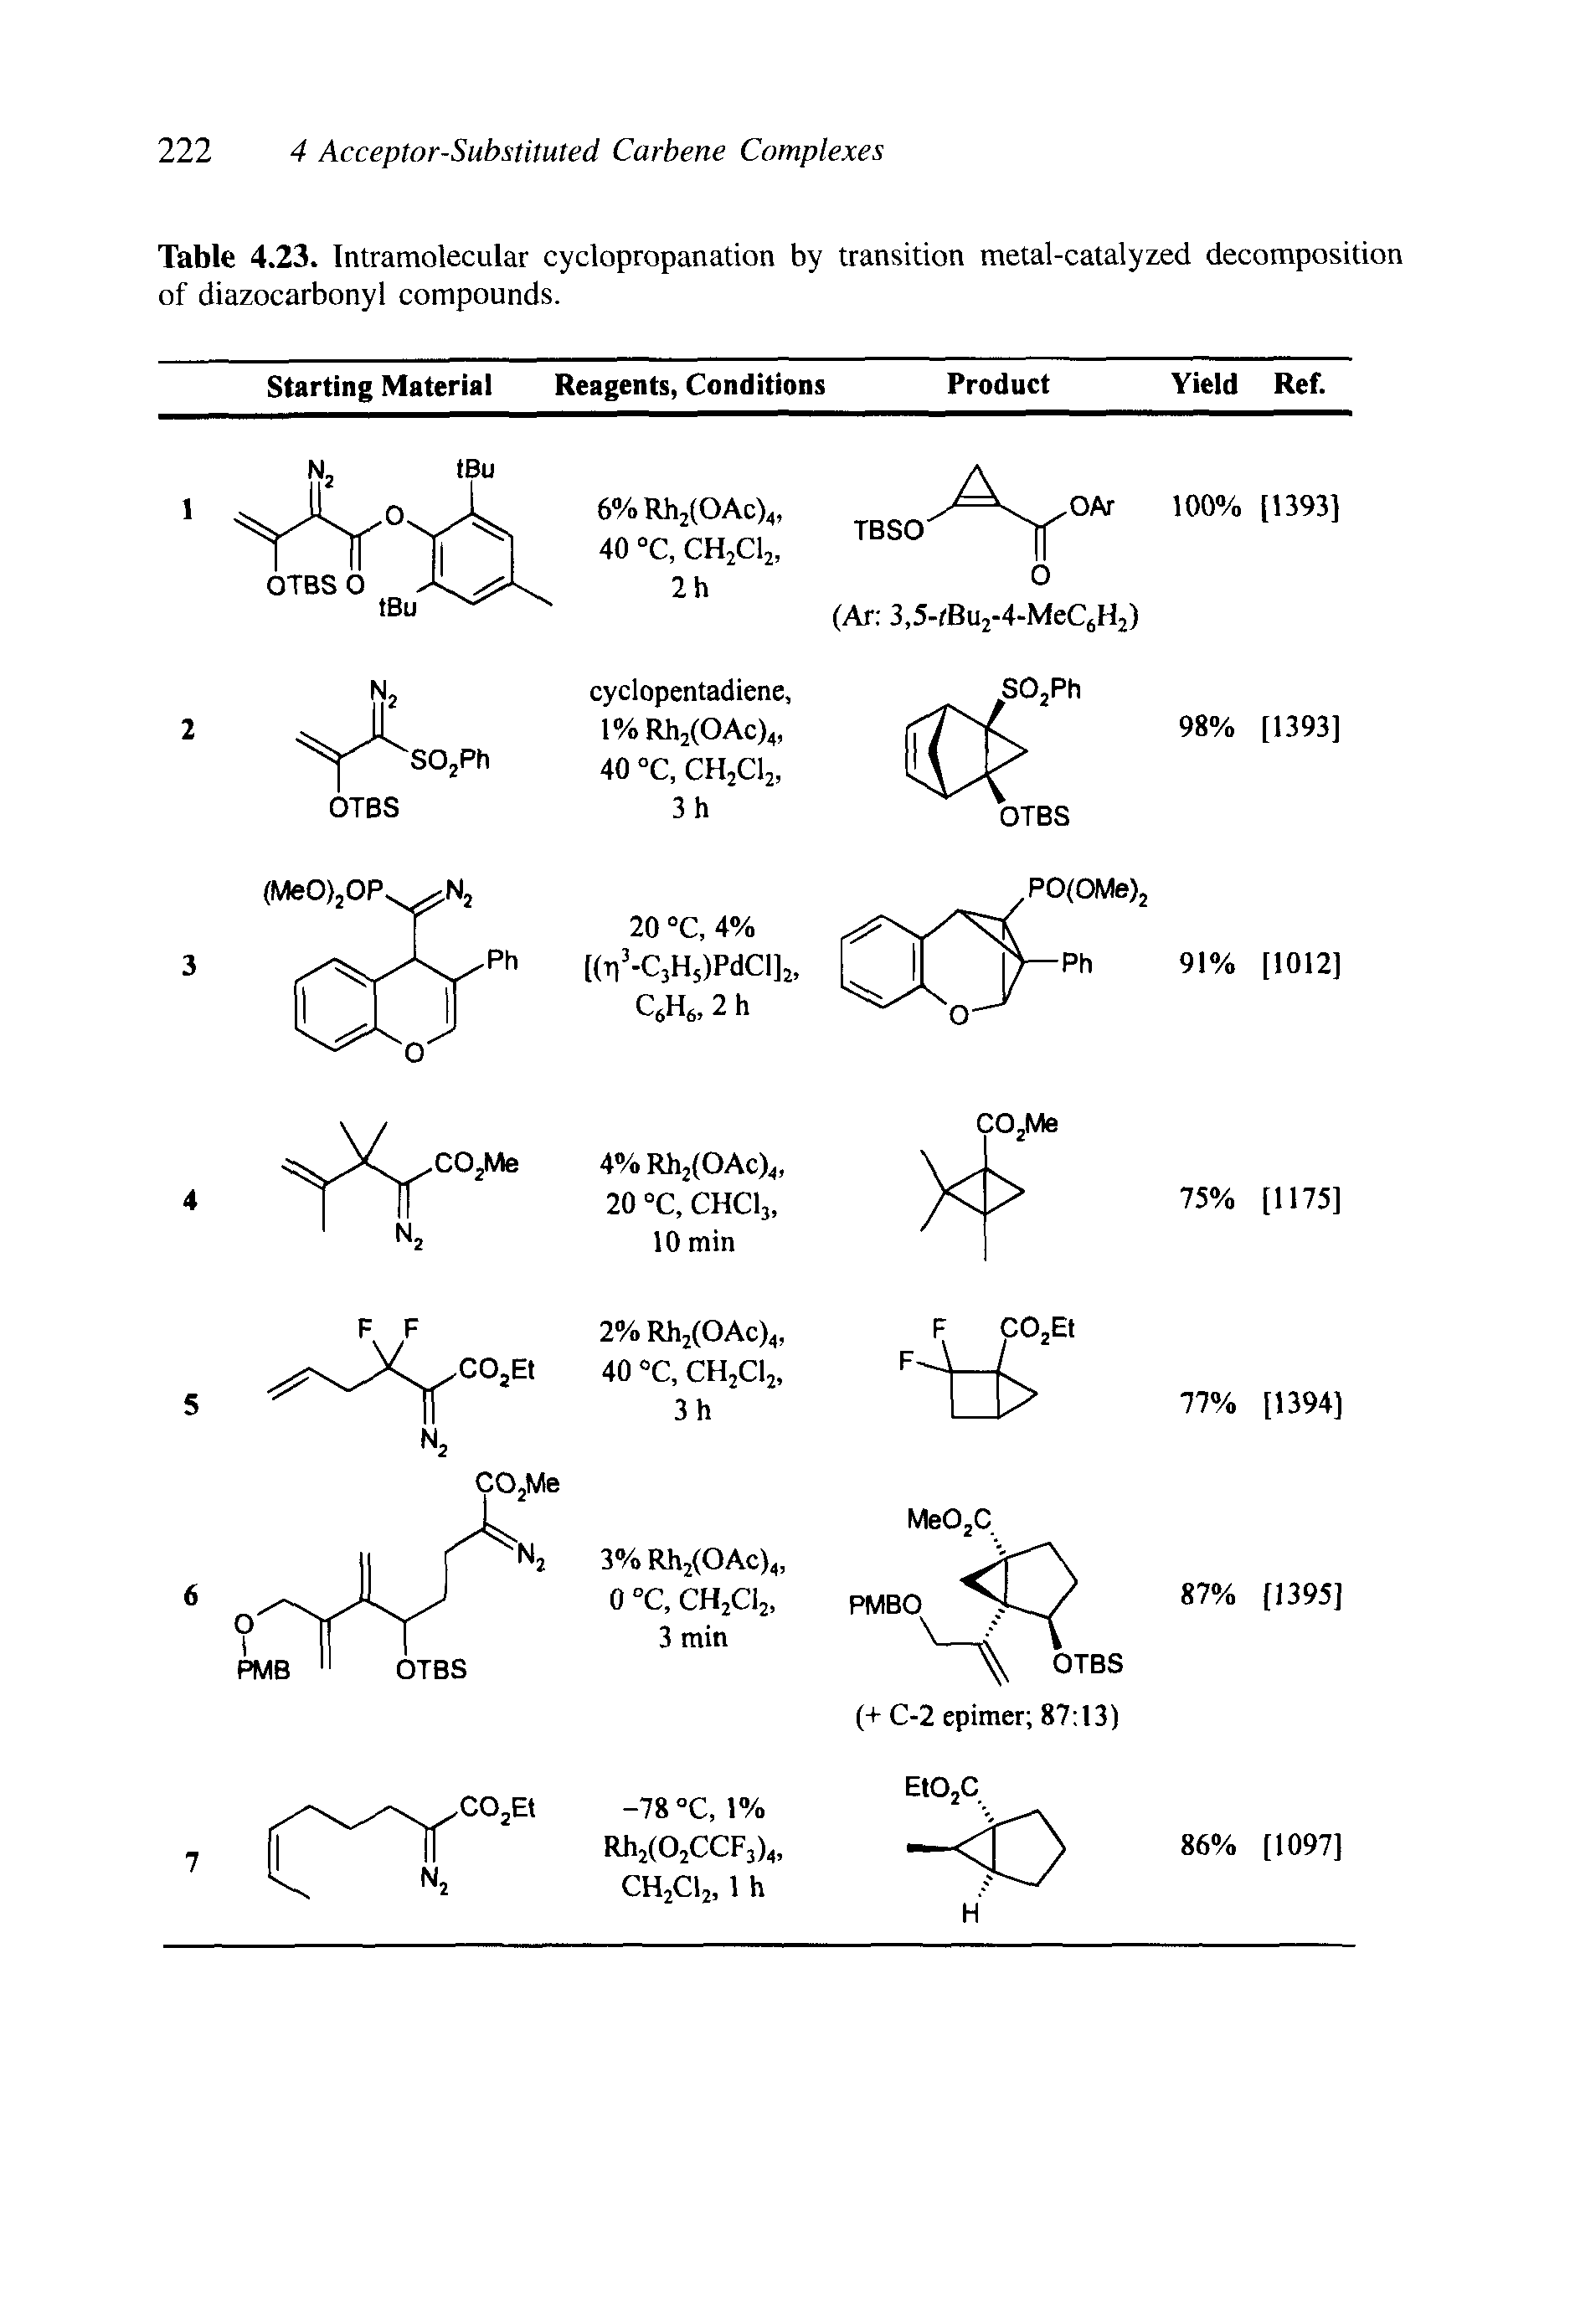 Table 4.23. Intramolecular cyclopropanation by transition metal-catalyzed decomposition of diazocarbonyl compounds.